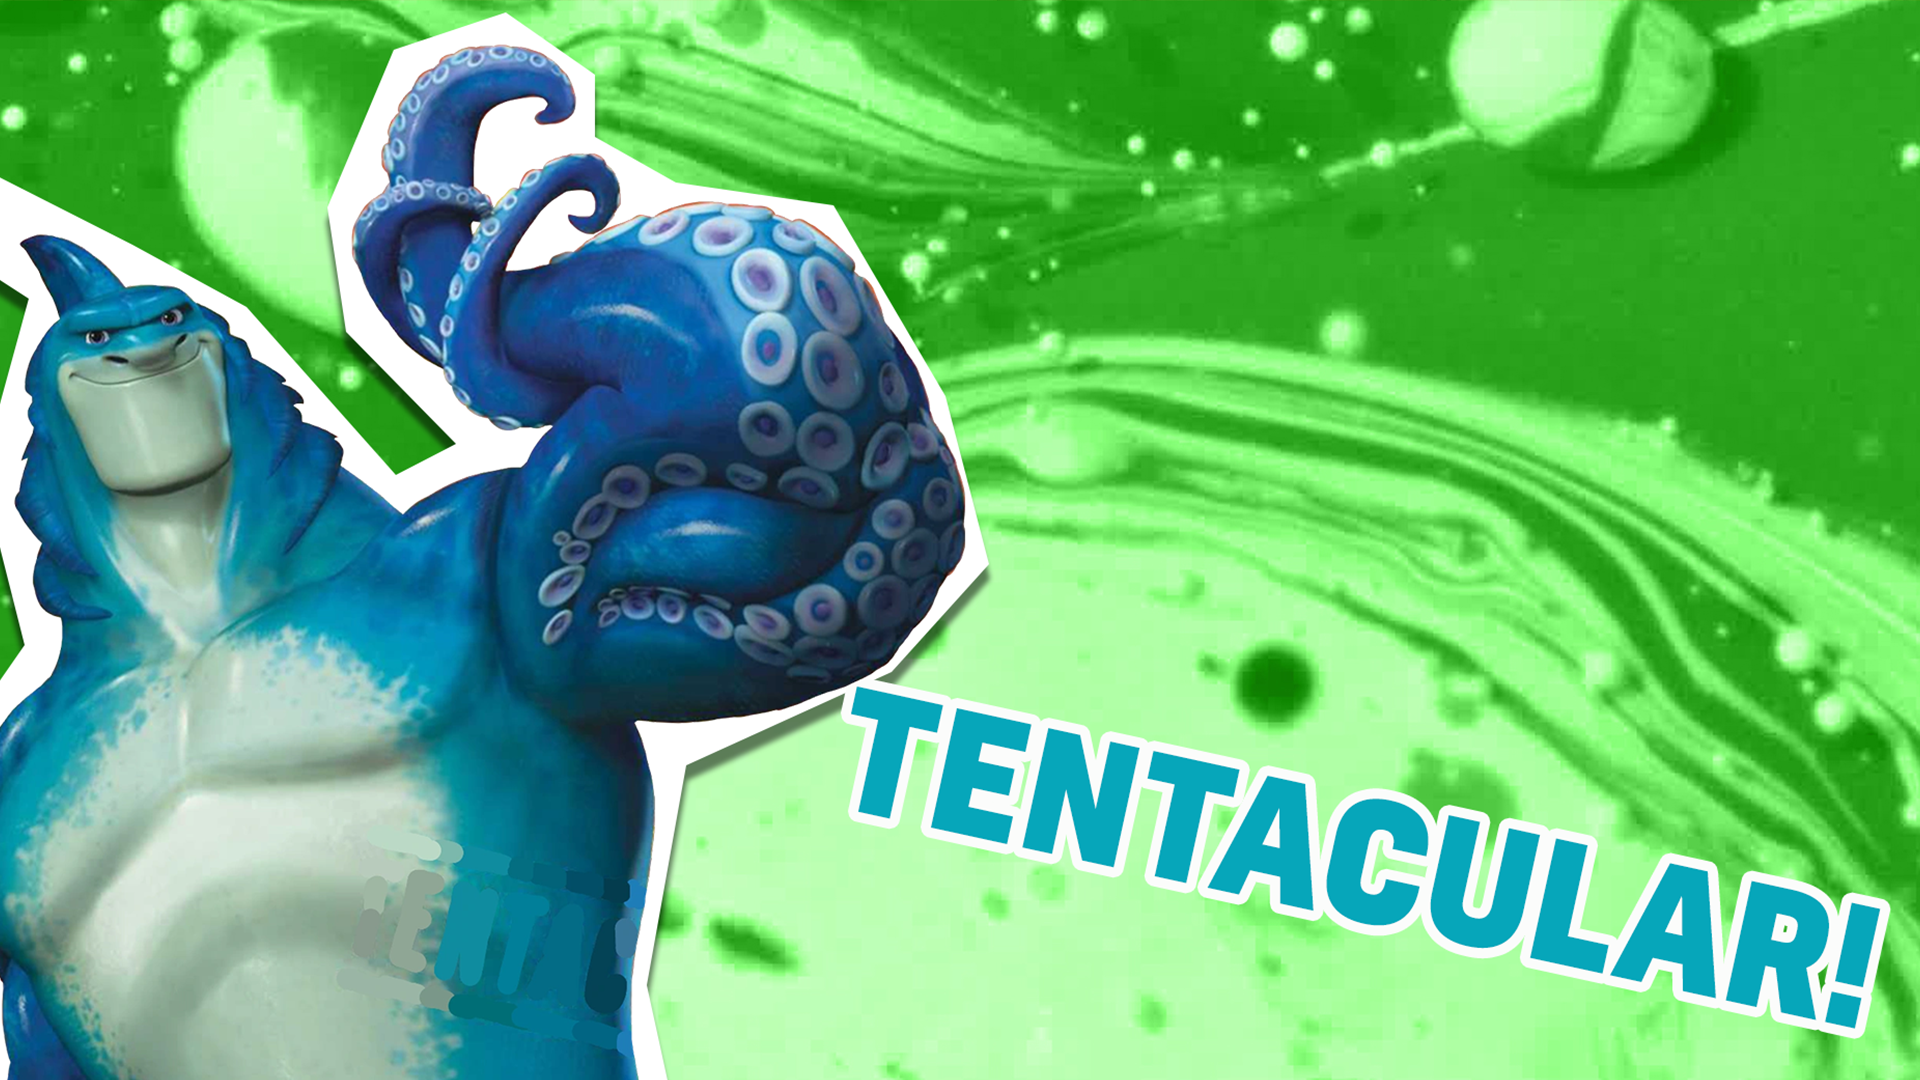 You're Tentacular! You're cool, calm and you know you're the best! But you also care about your friends and family and would do anything for them!